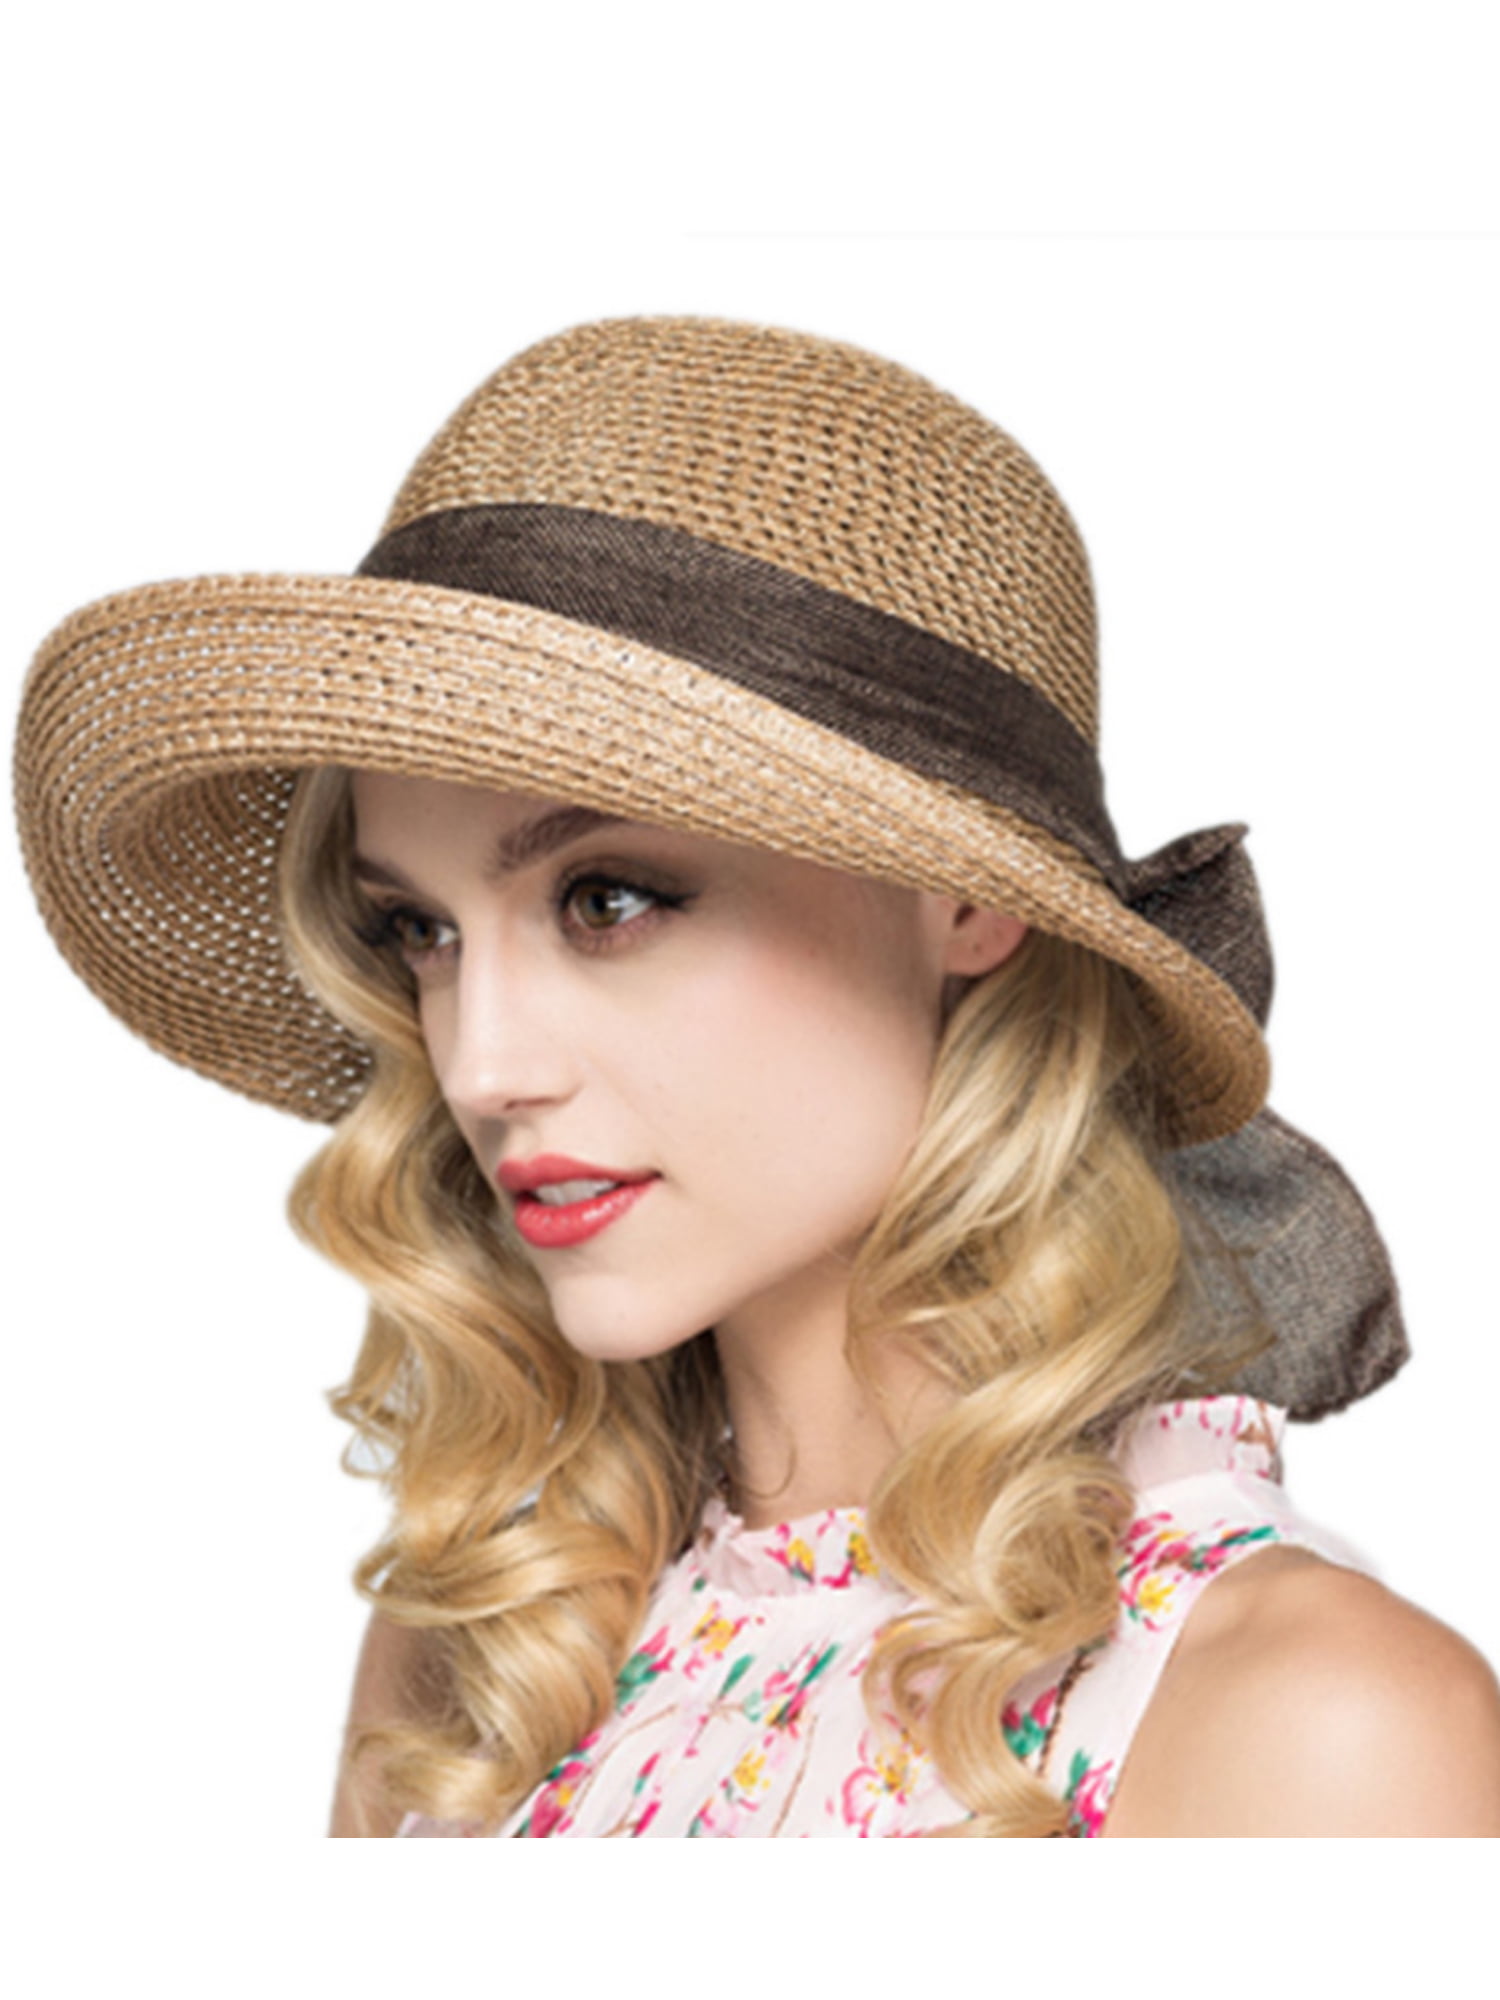 First Class Post Ladies/Womens Straw Sun Hat Crushable and Packable 